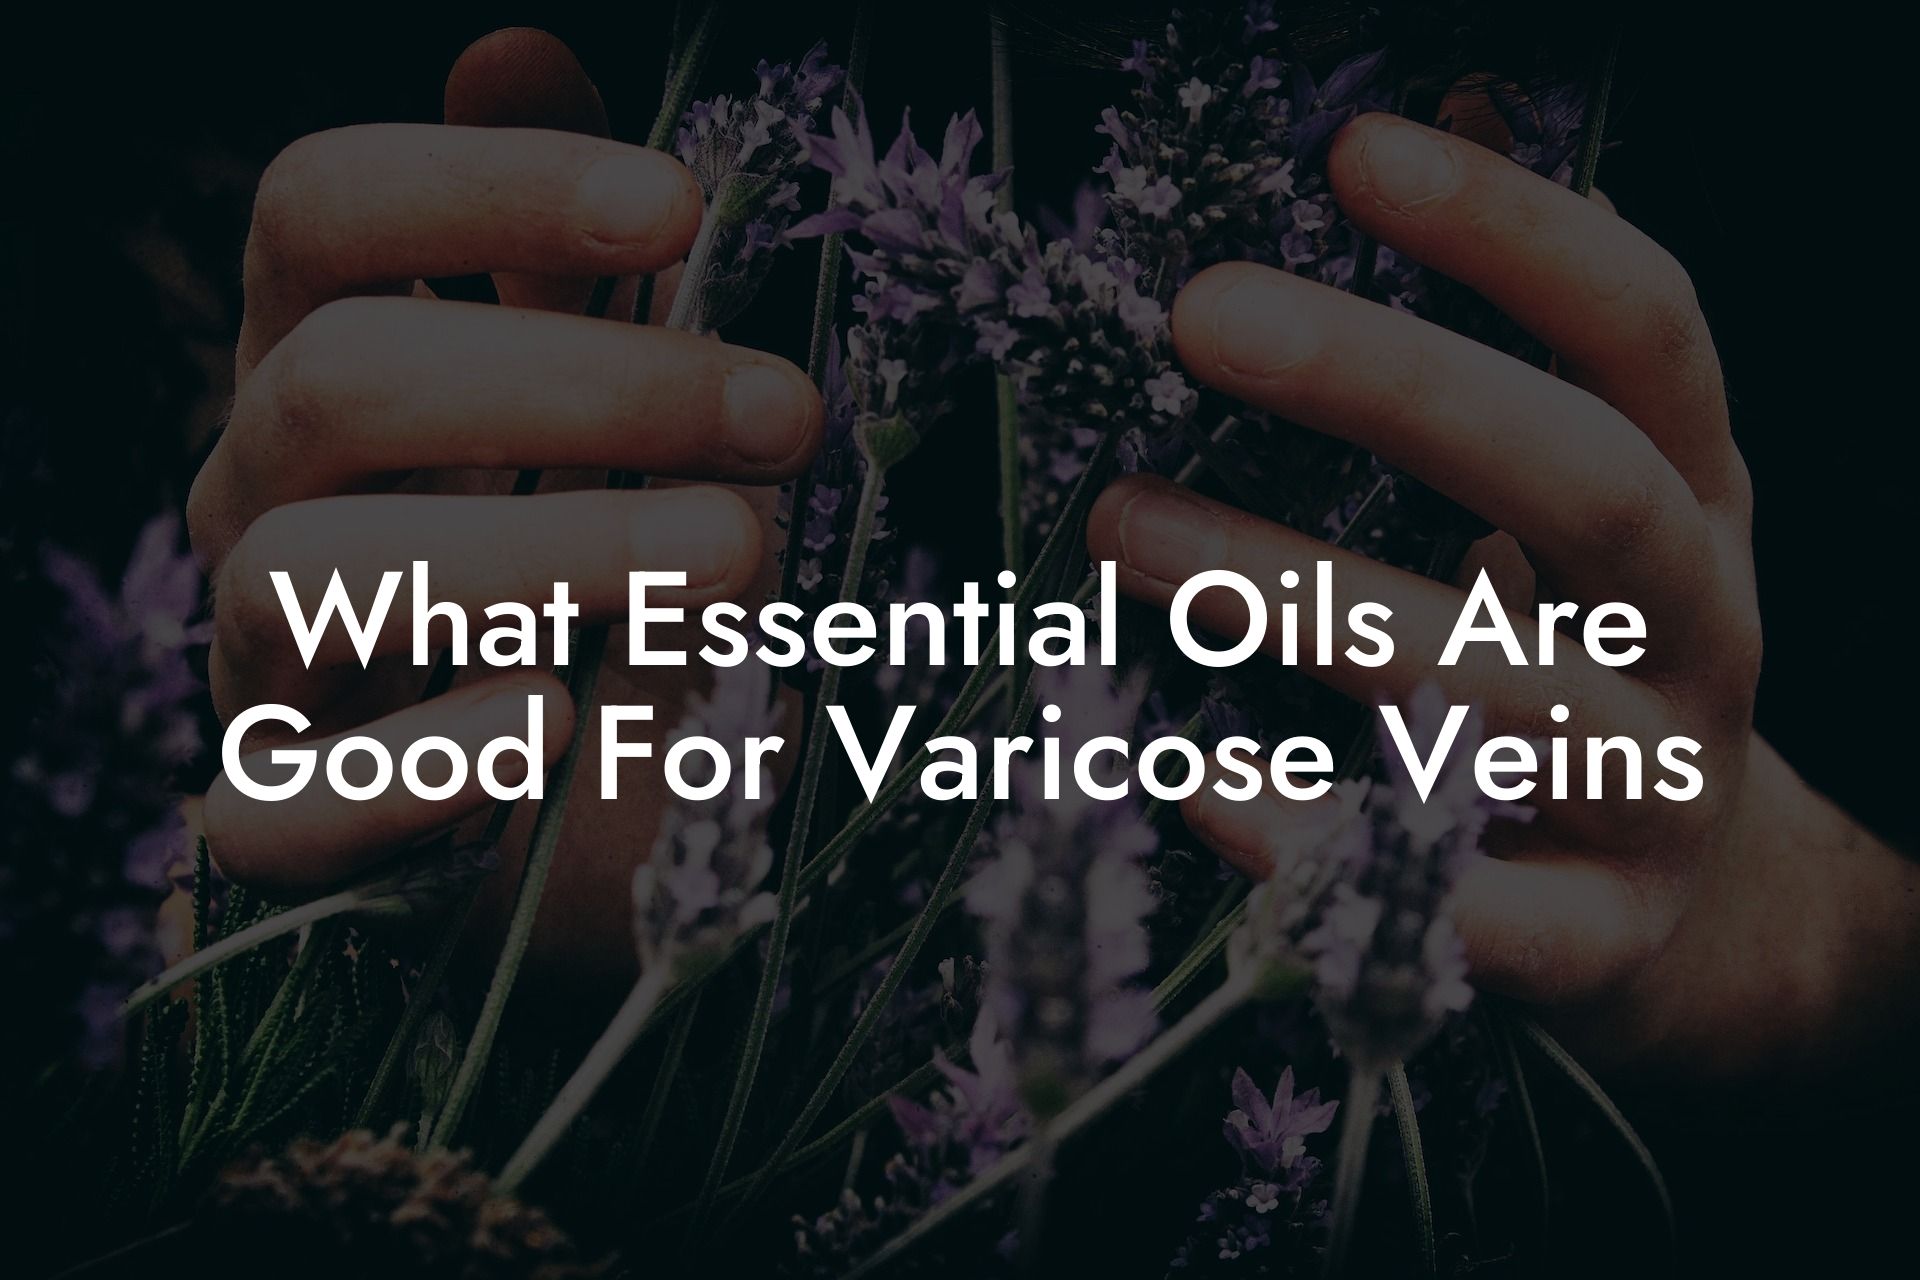 What Essential Oils Are Good For Varicose Veins